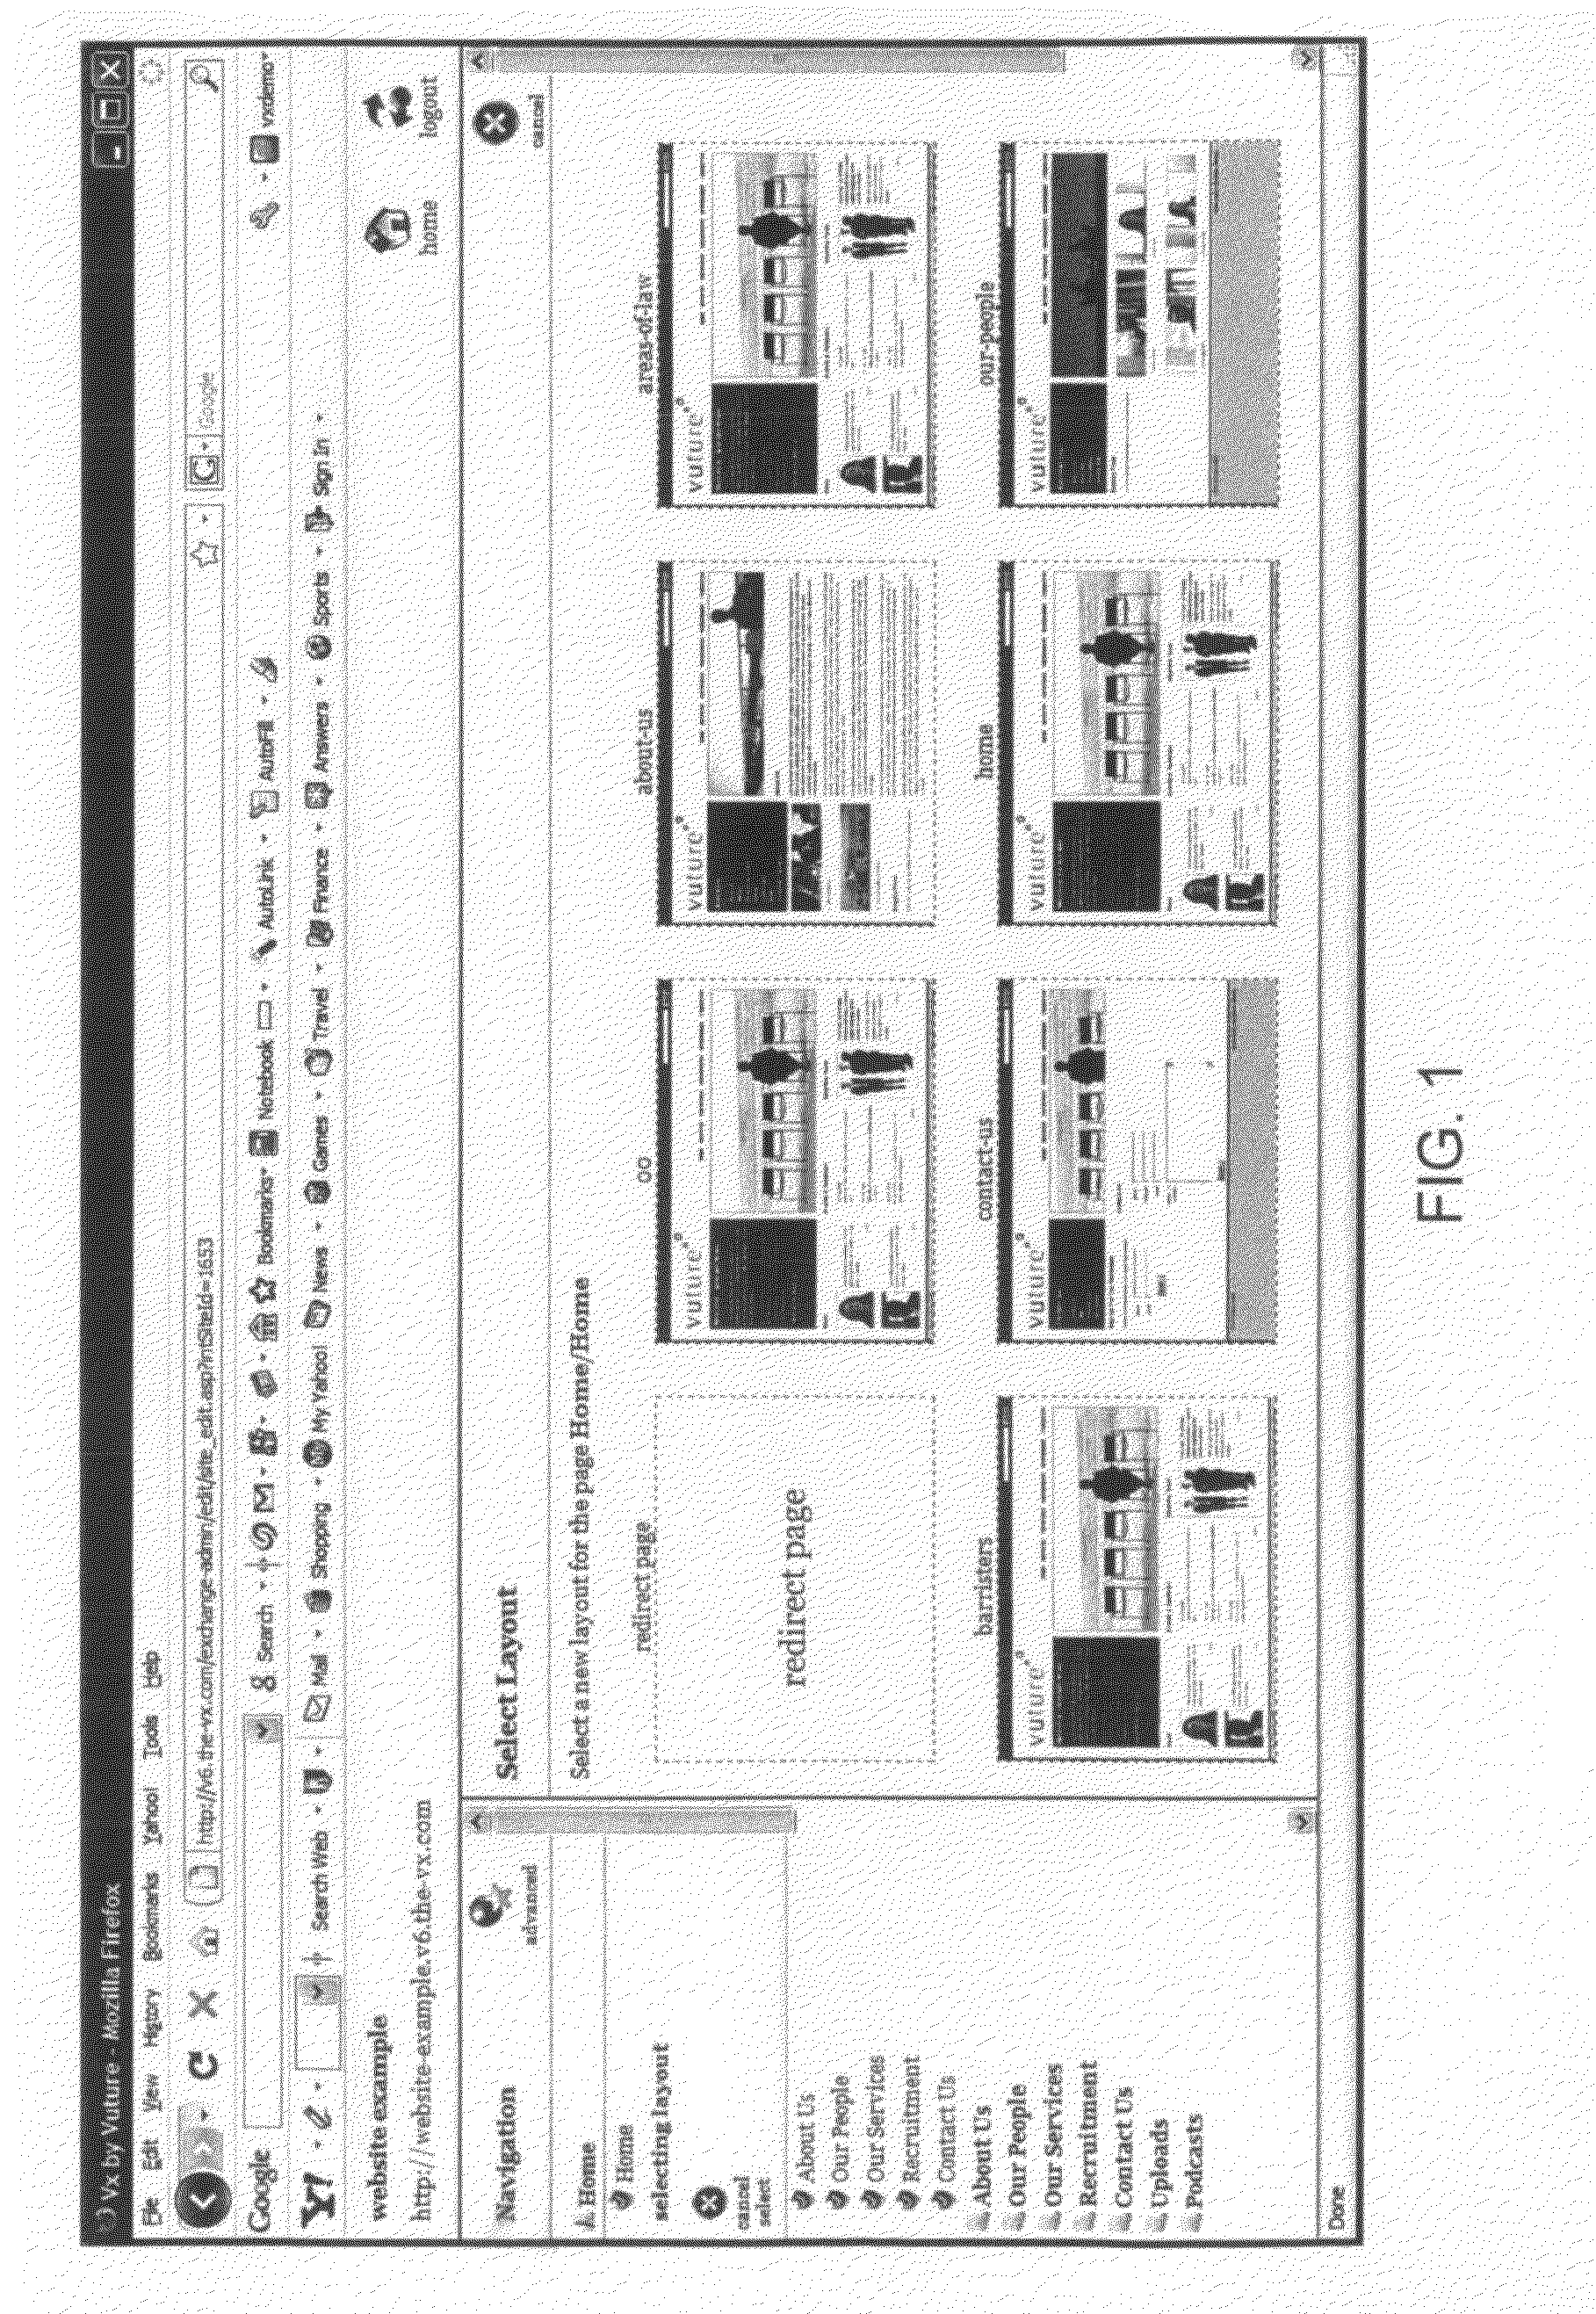 Systems and methods for processing online and print material